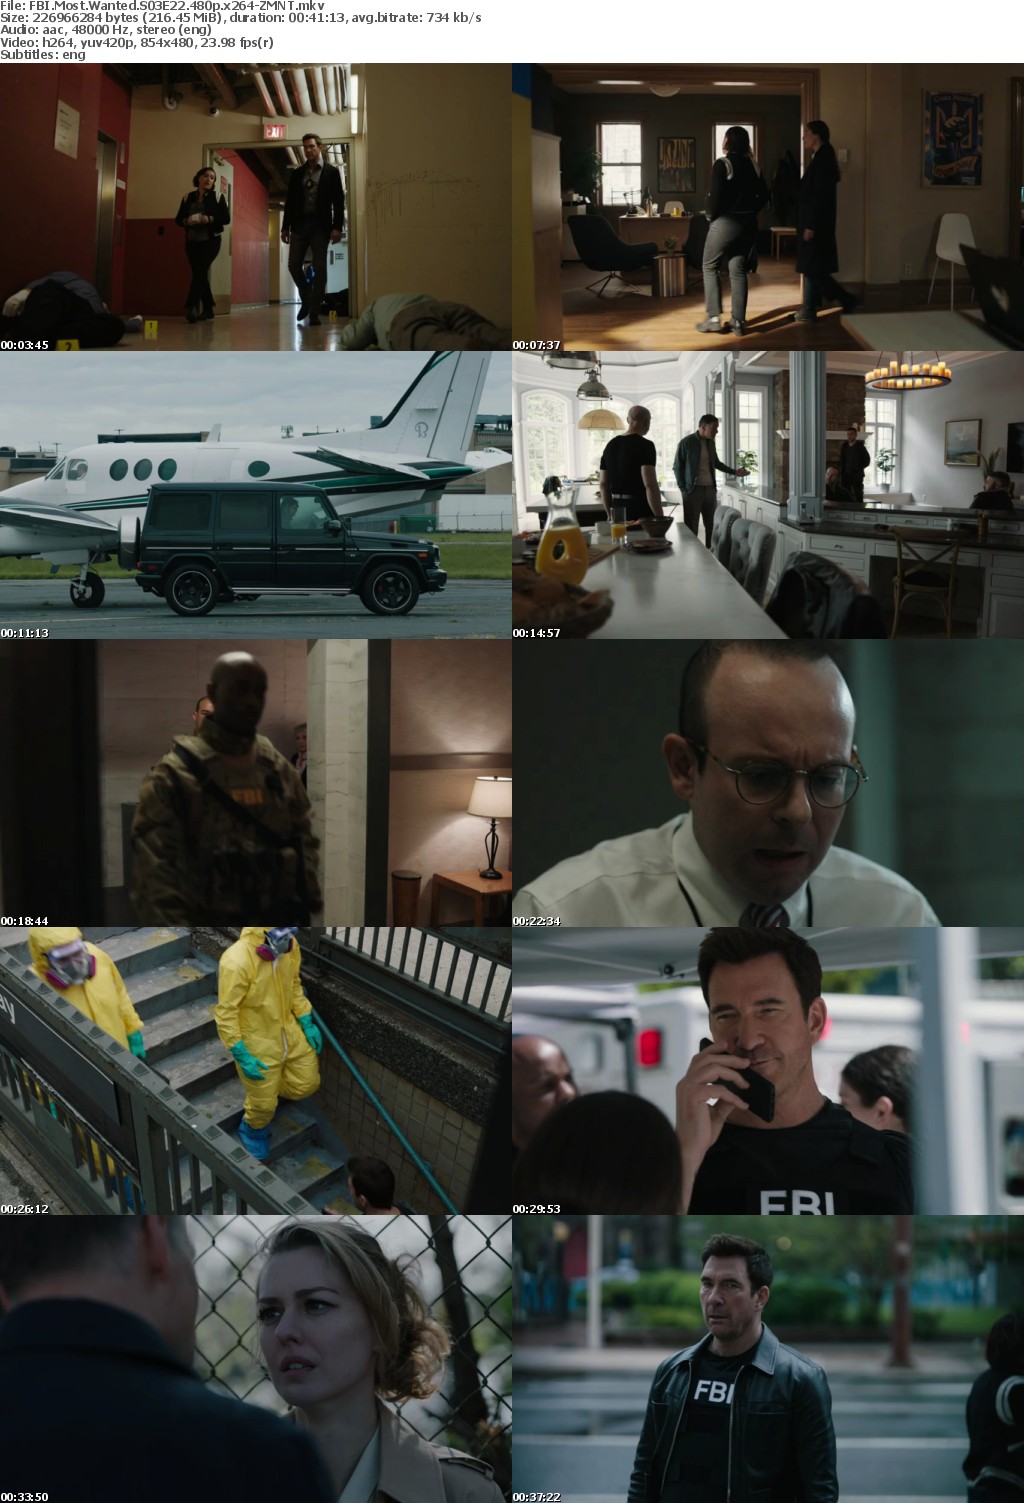 FBI Most Wanted S03E22 480p x264-ZMNT